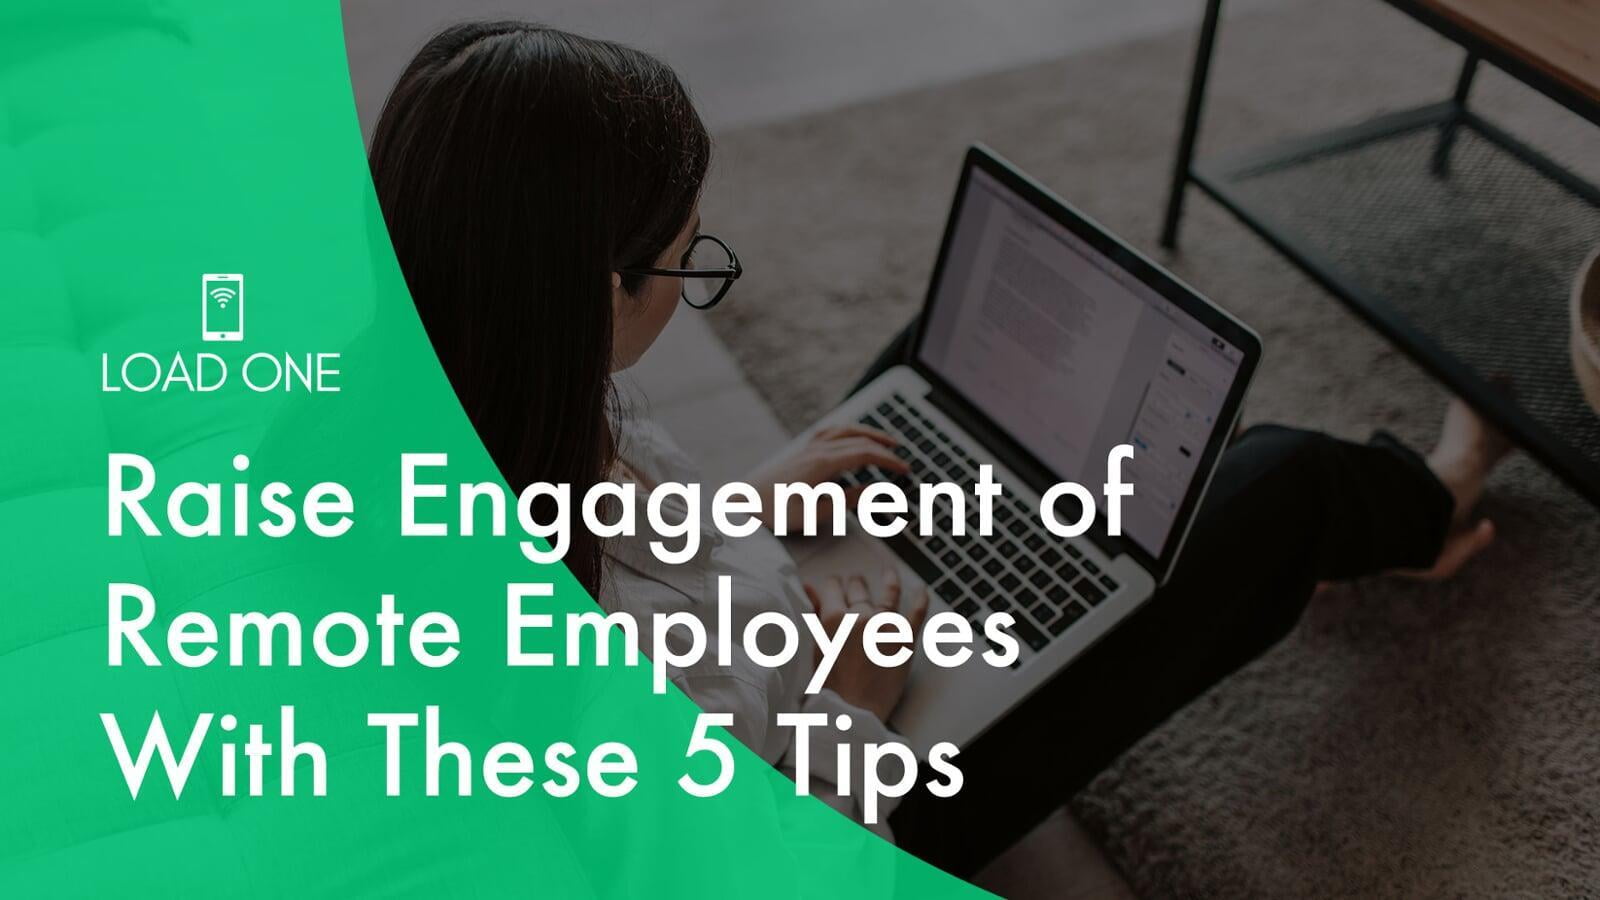 Raise Engagement of Remote Employees With These 5 Tips